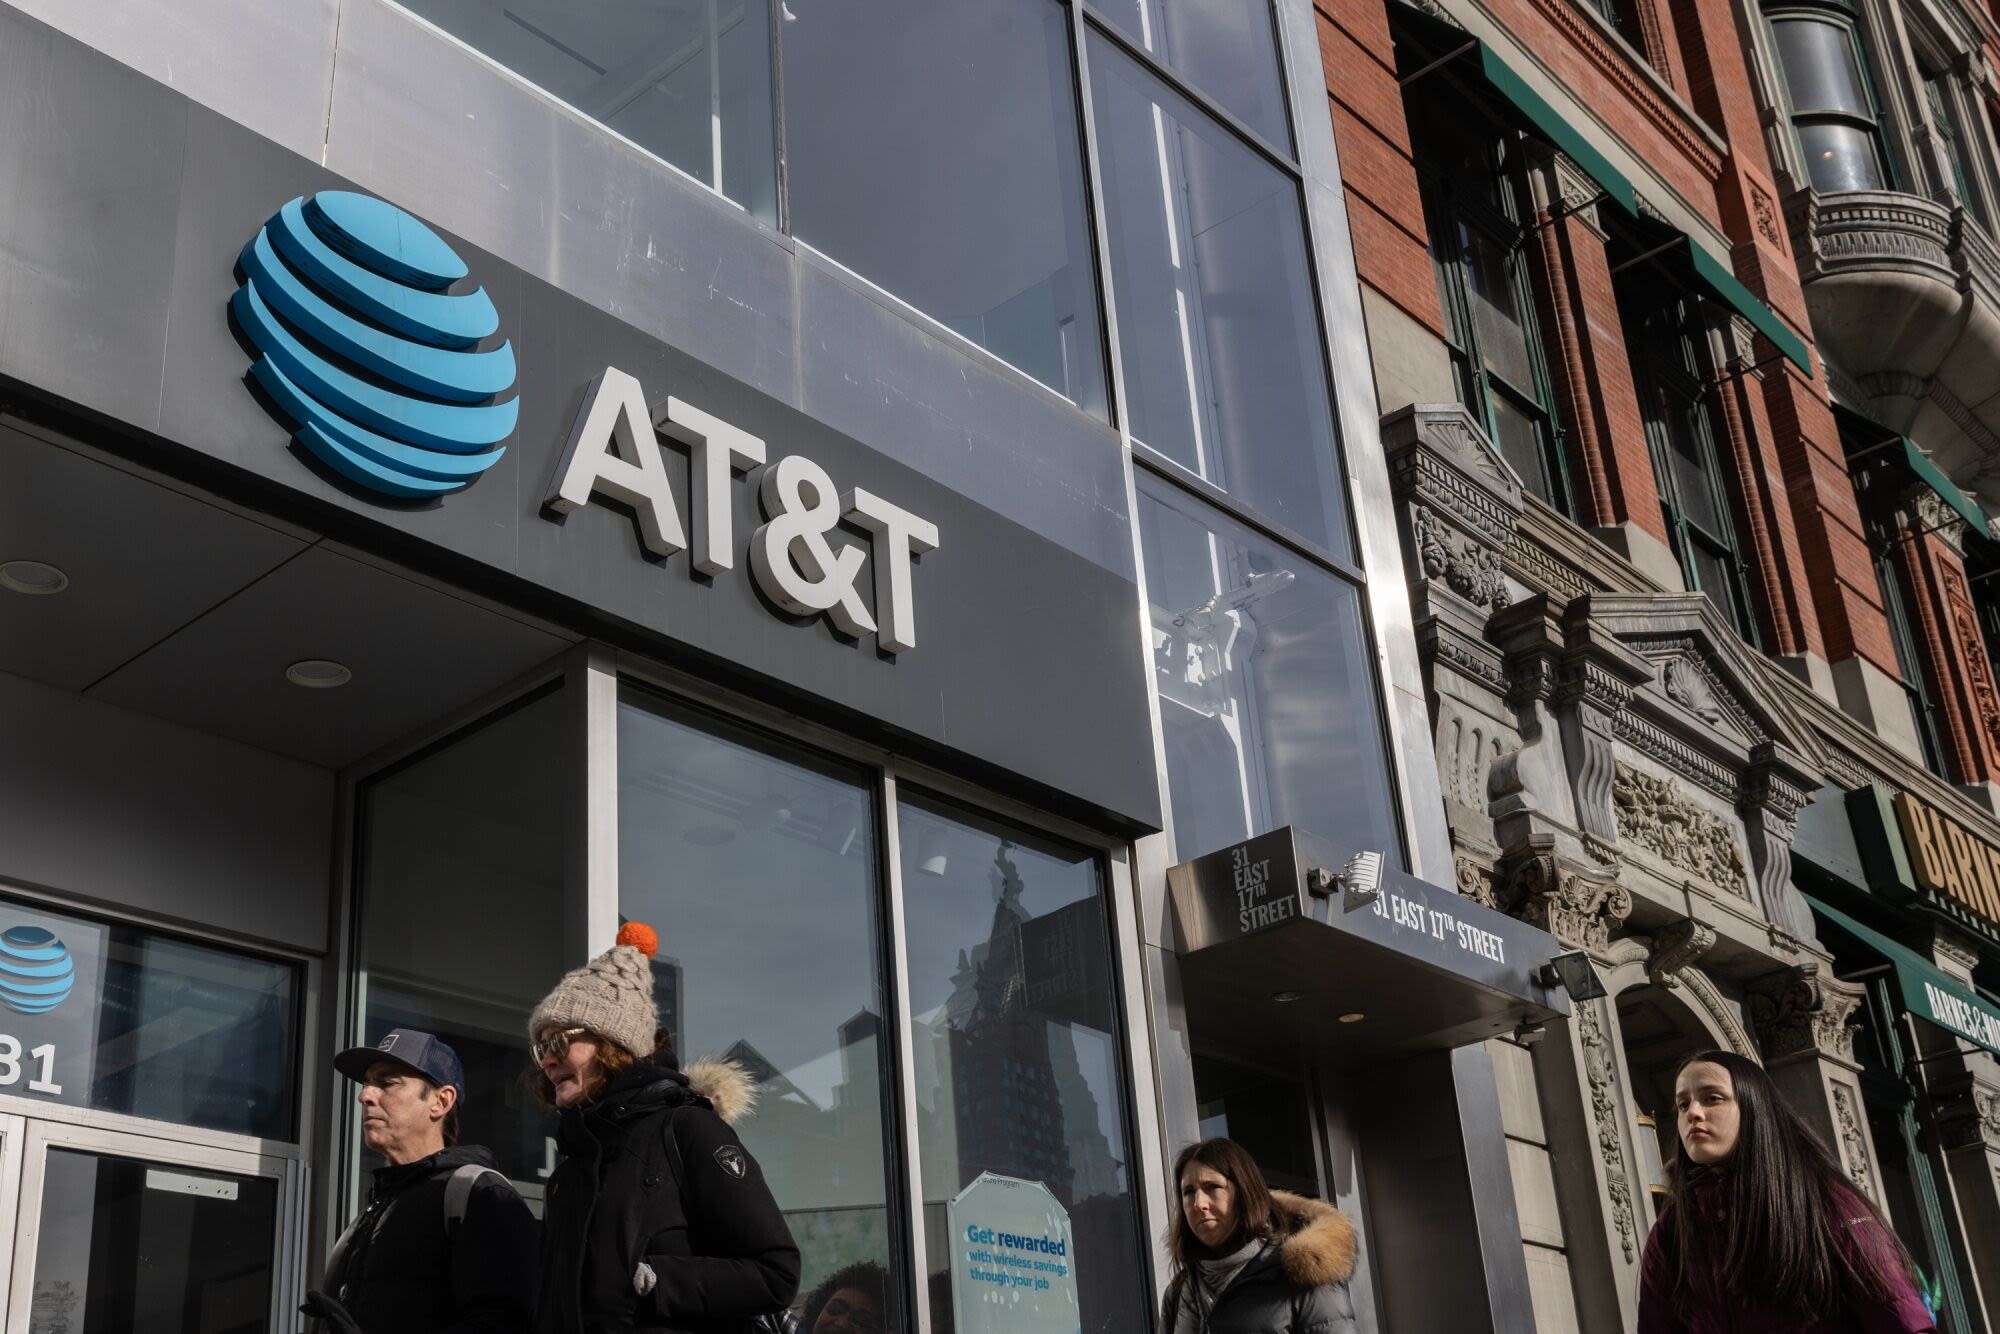 AT&T Says New Hack Includes Records of Customer Calls, Texts